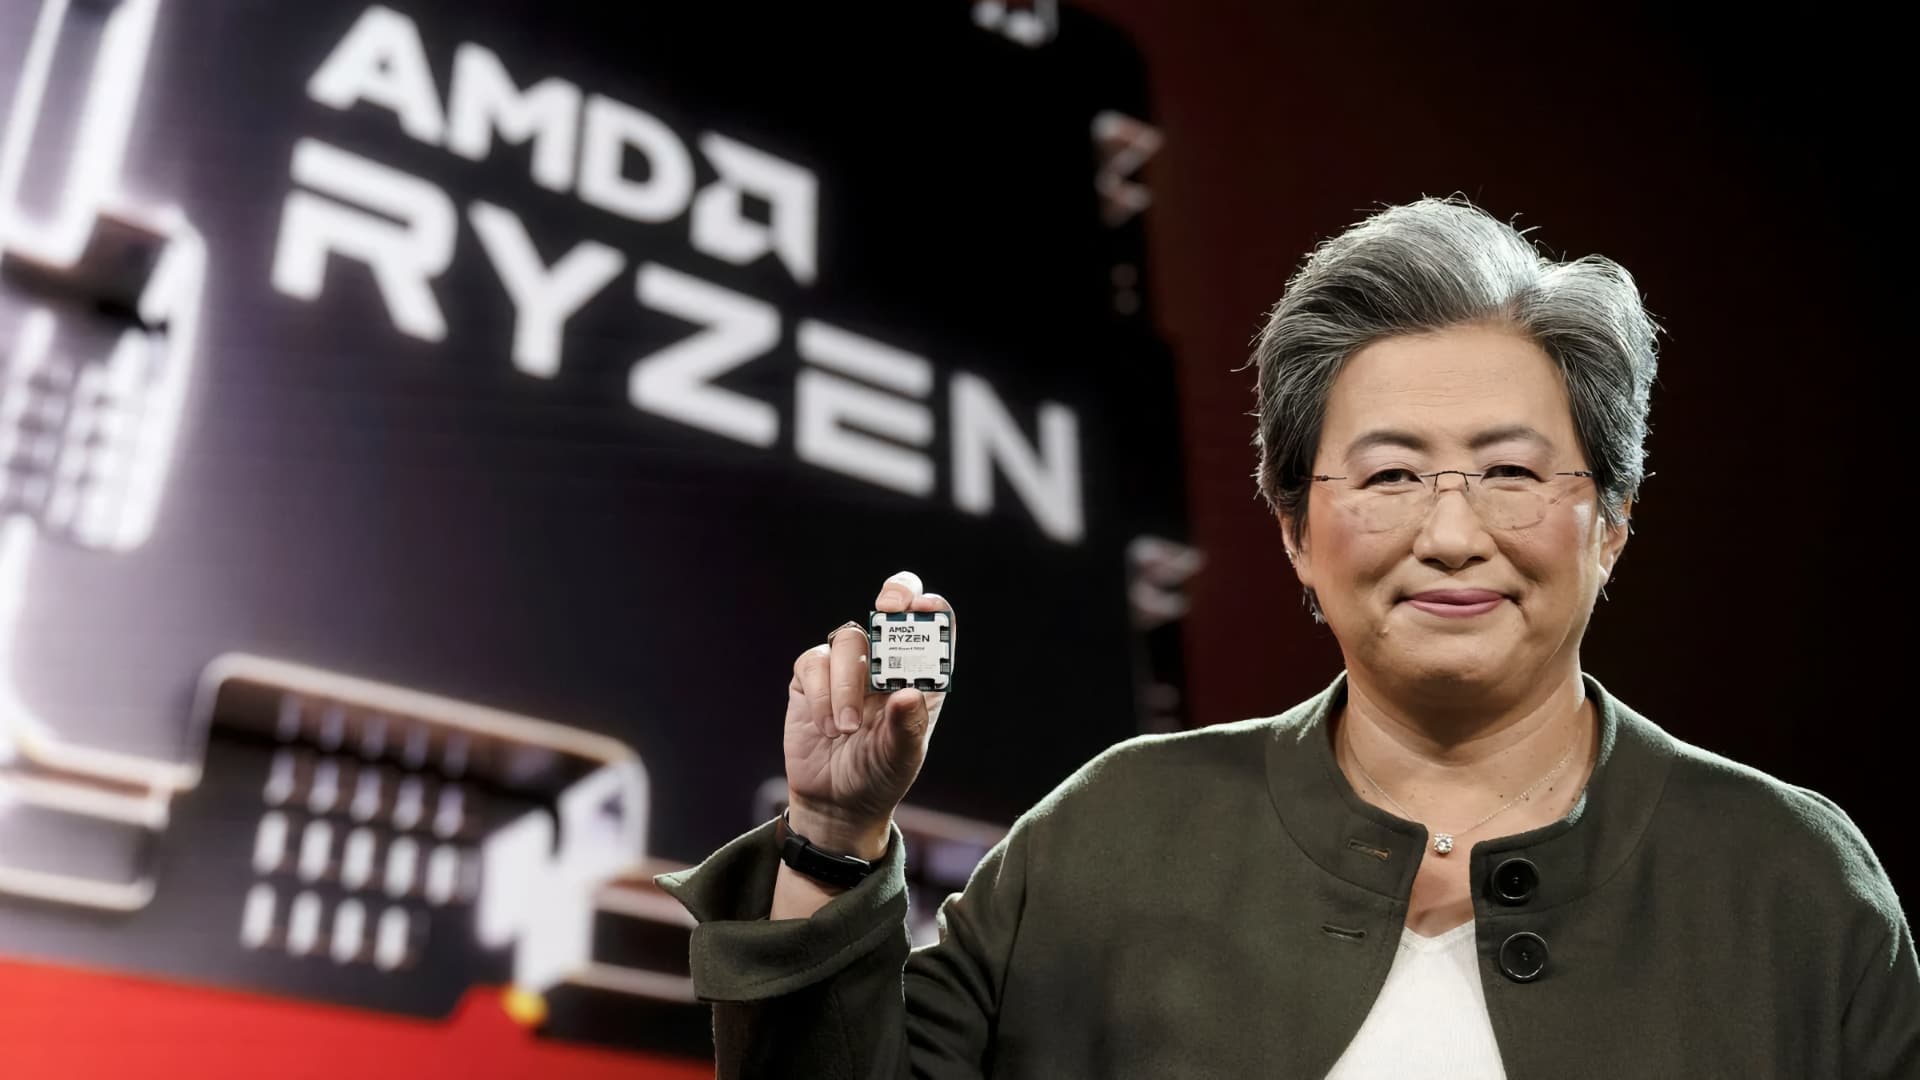 AMD's Chair and CEO, Dr Lisa Su, with the new Ryzen 7000